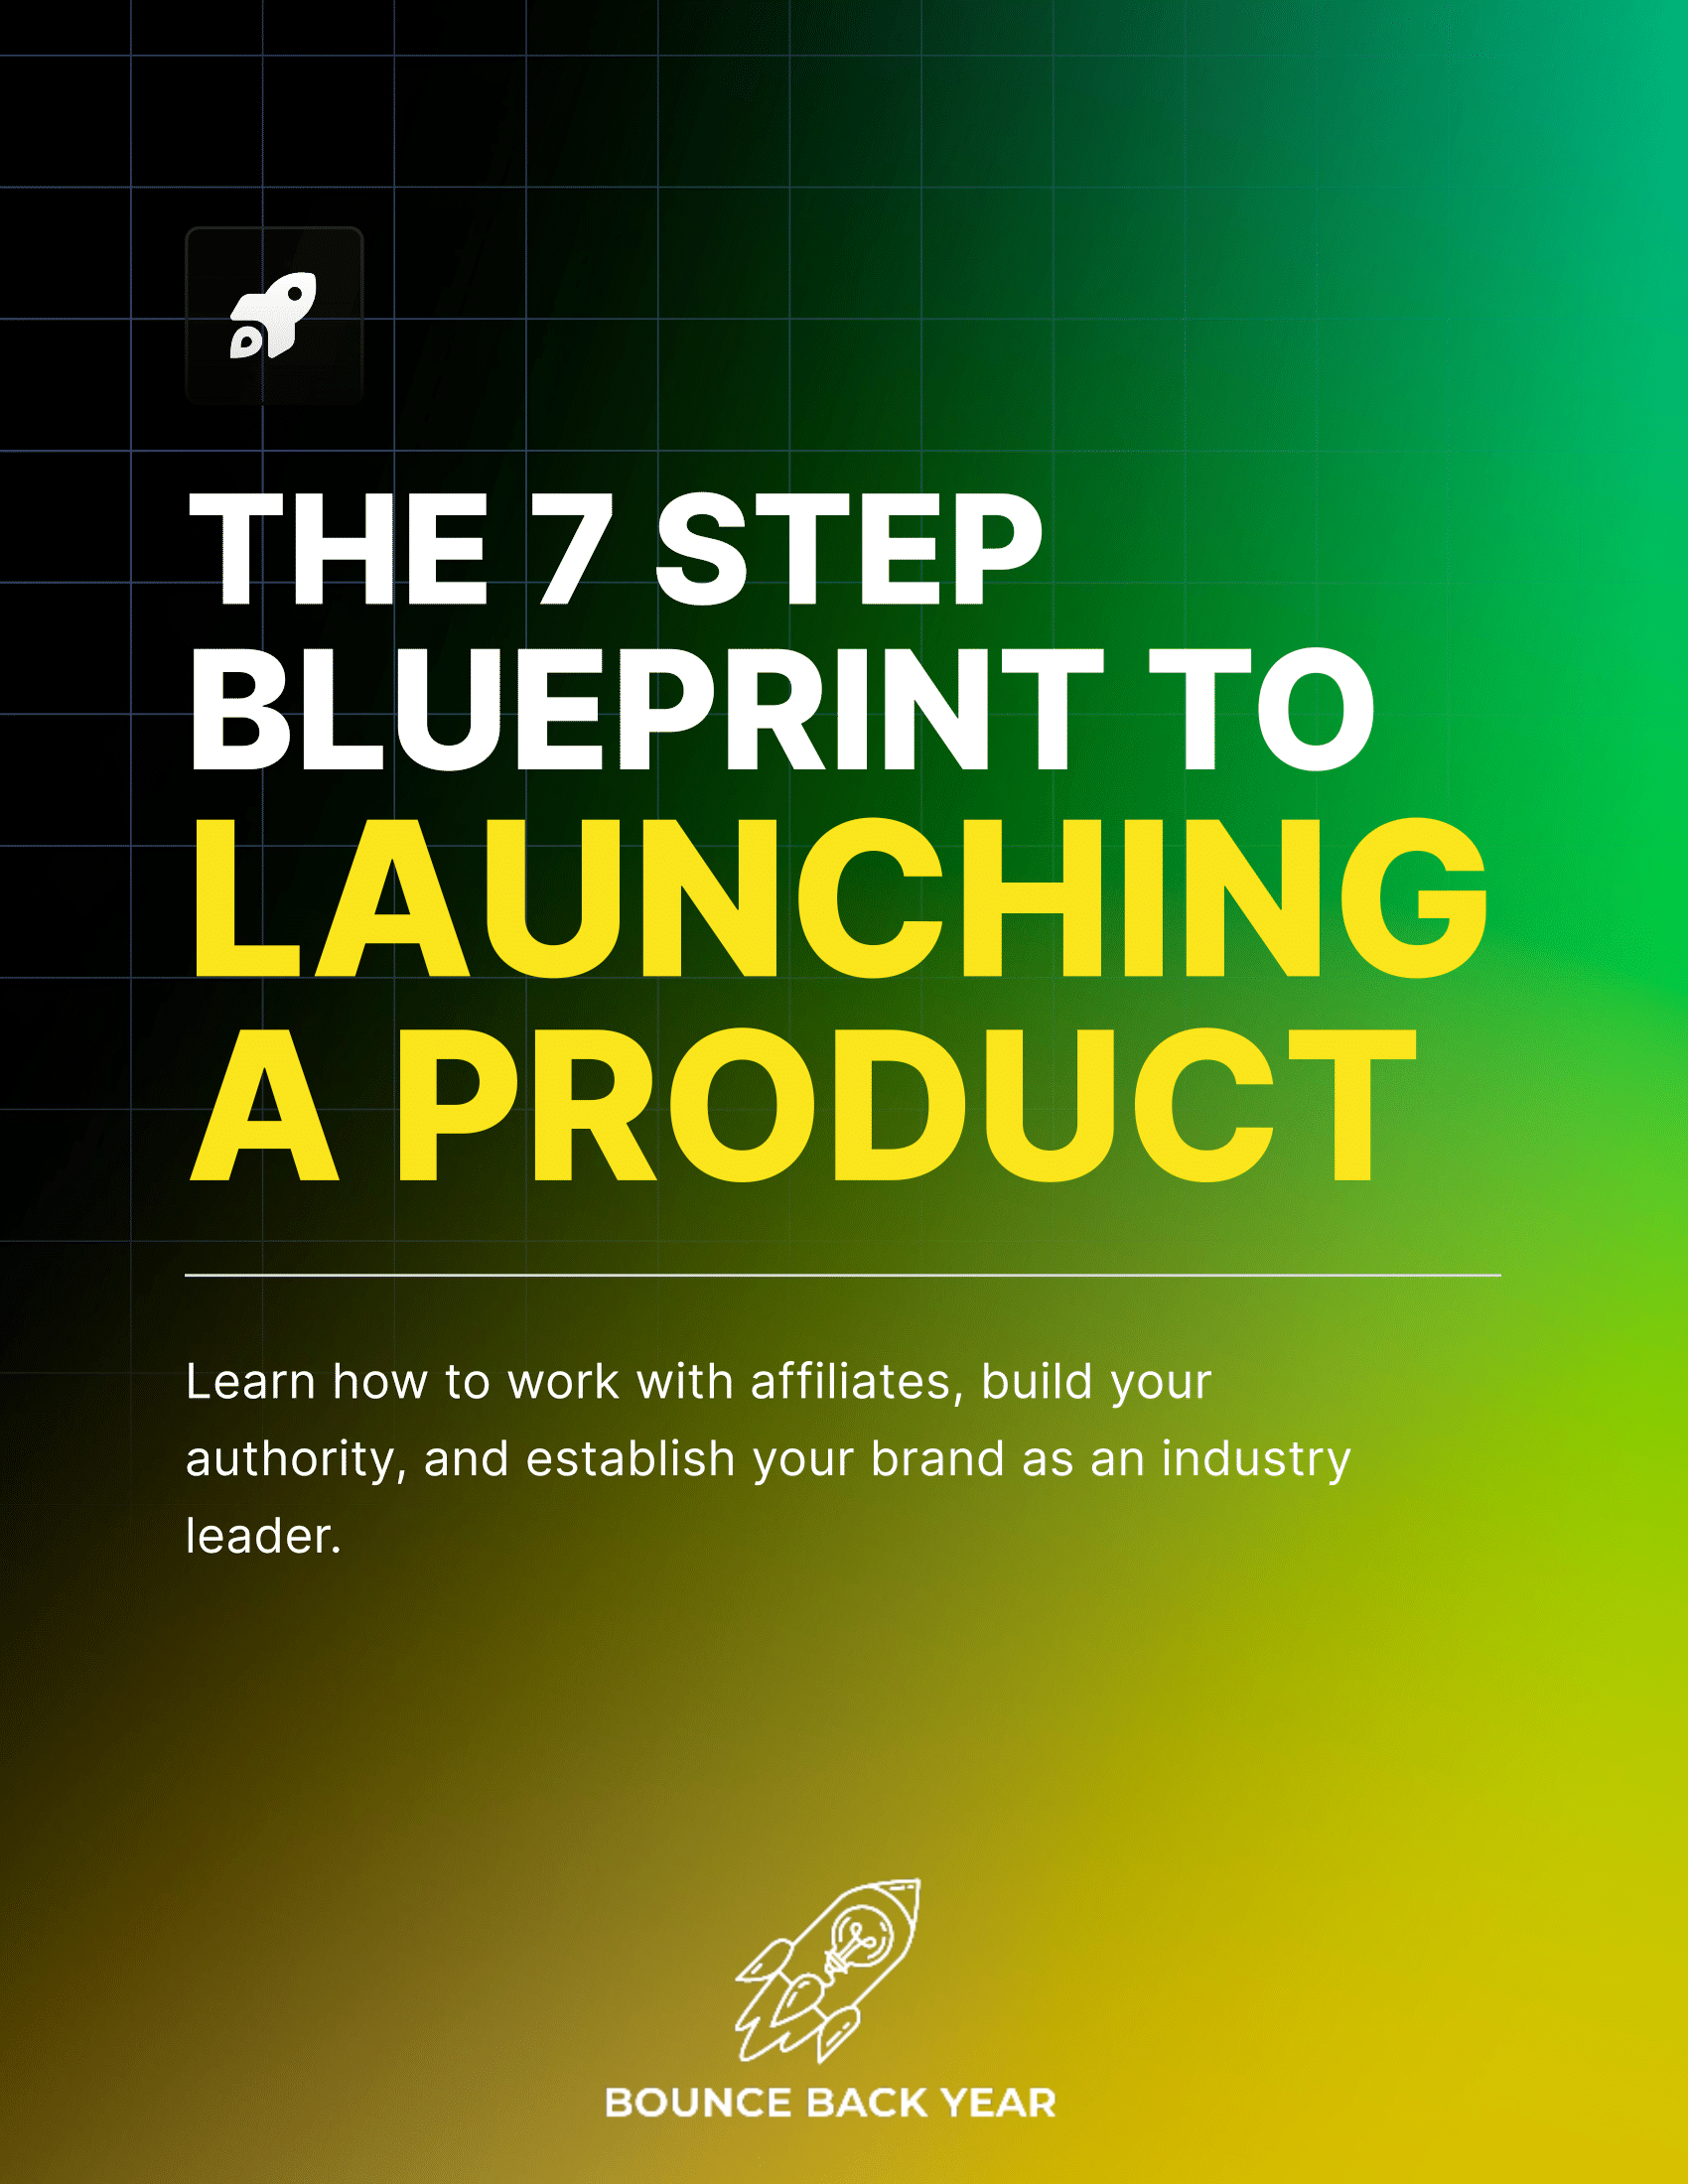 Product Launch Pro: The 7-Step Blueprint to Launching a Product